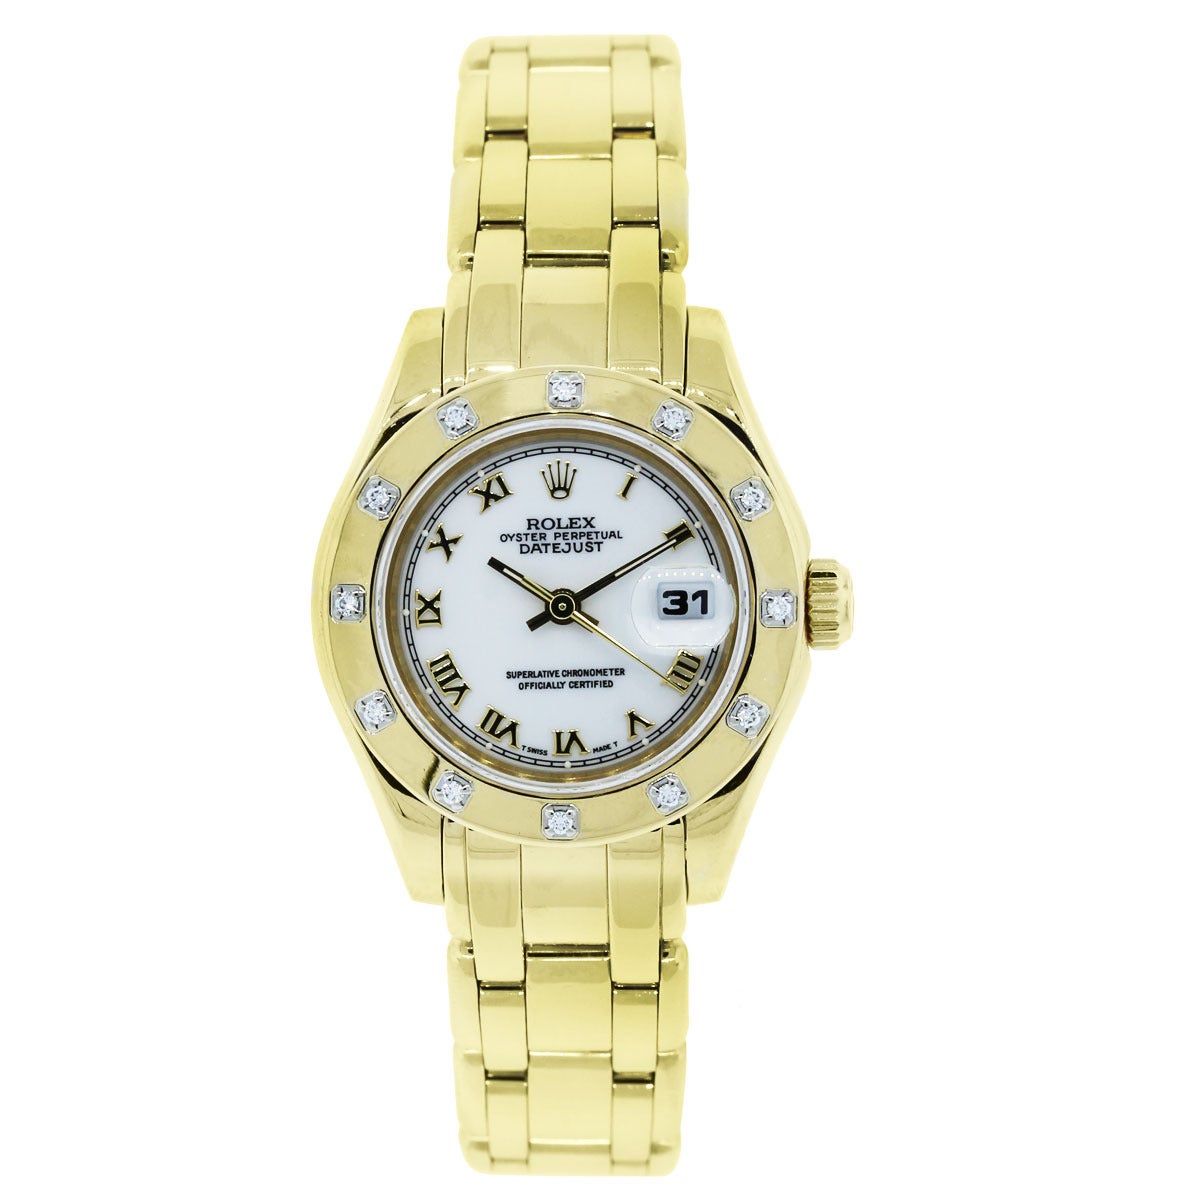 Brand: Rolex
Model: Masterpiece
Reference Number: 69318
Serial: 